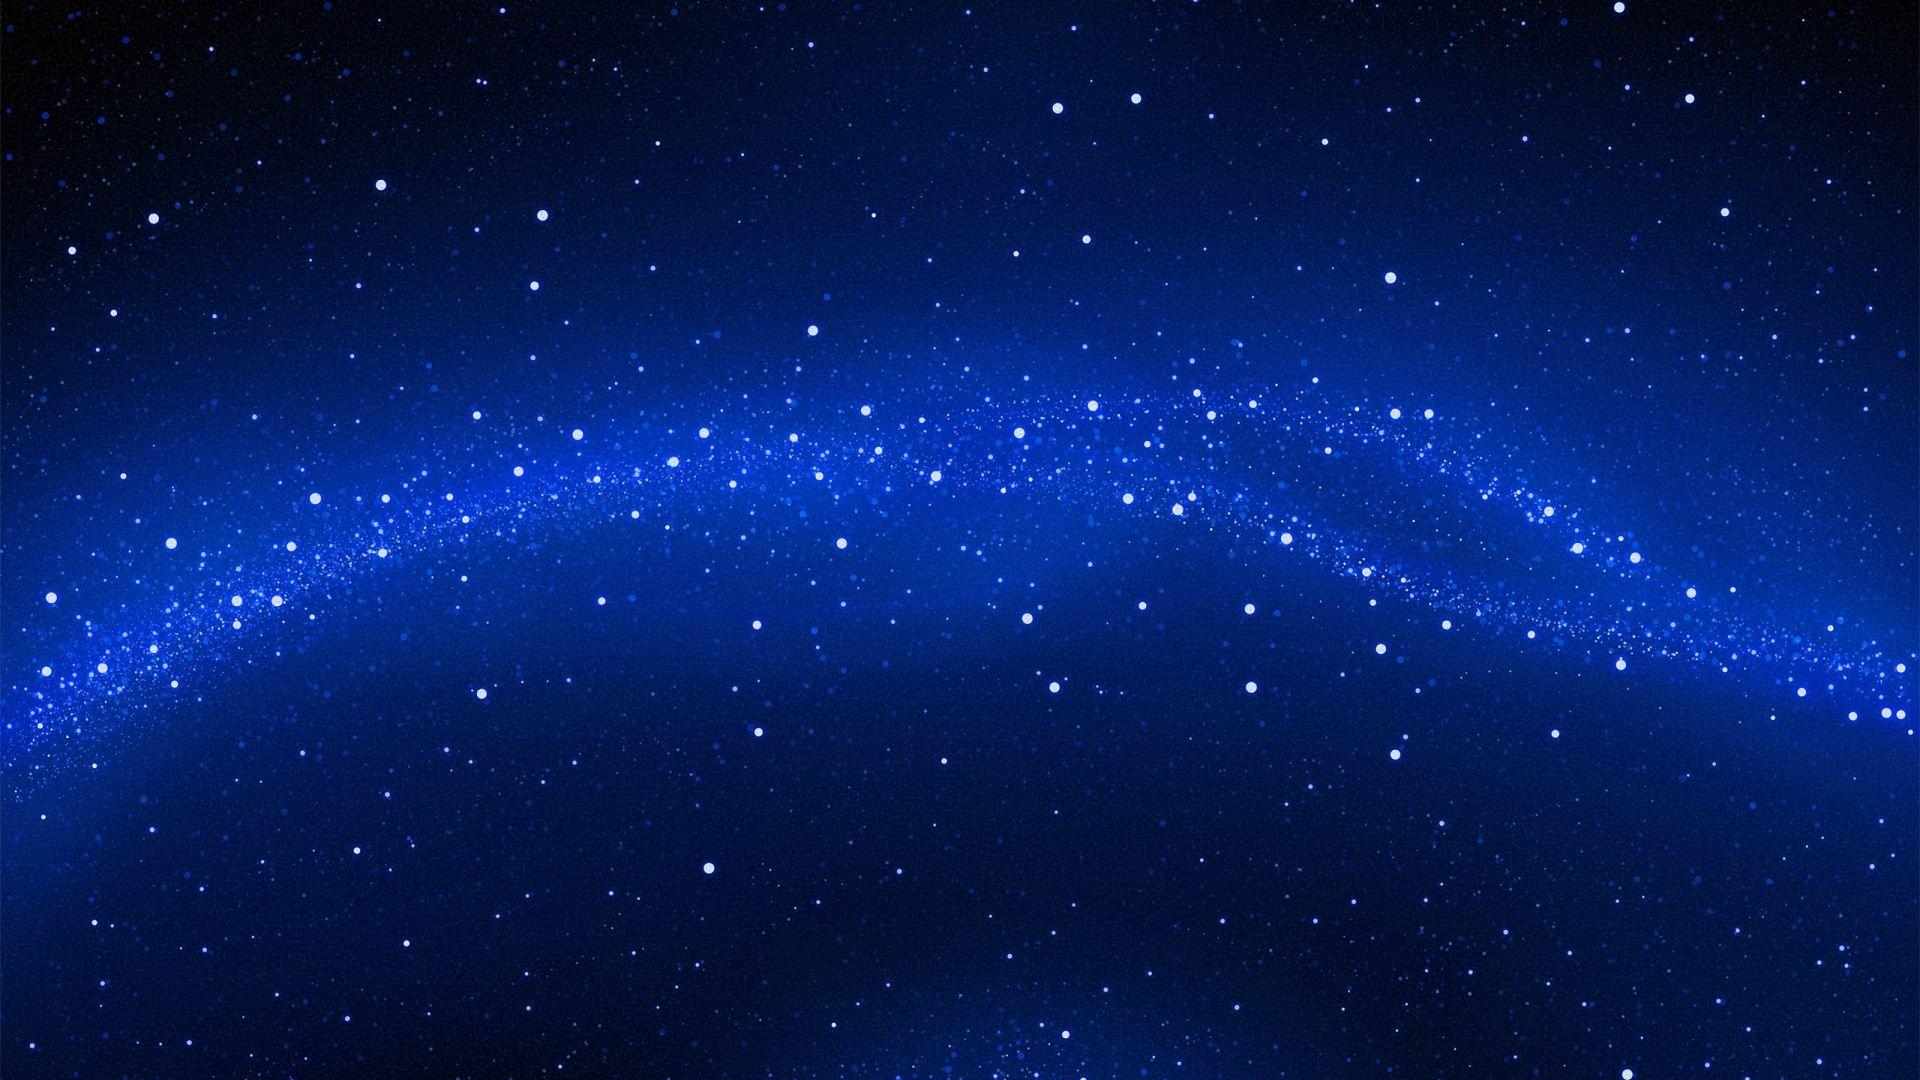 Download Wallpaper 1920x1080 space, stars, blue background Full HD